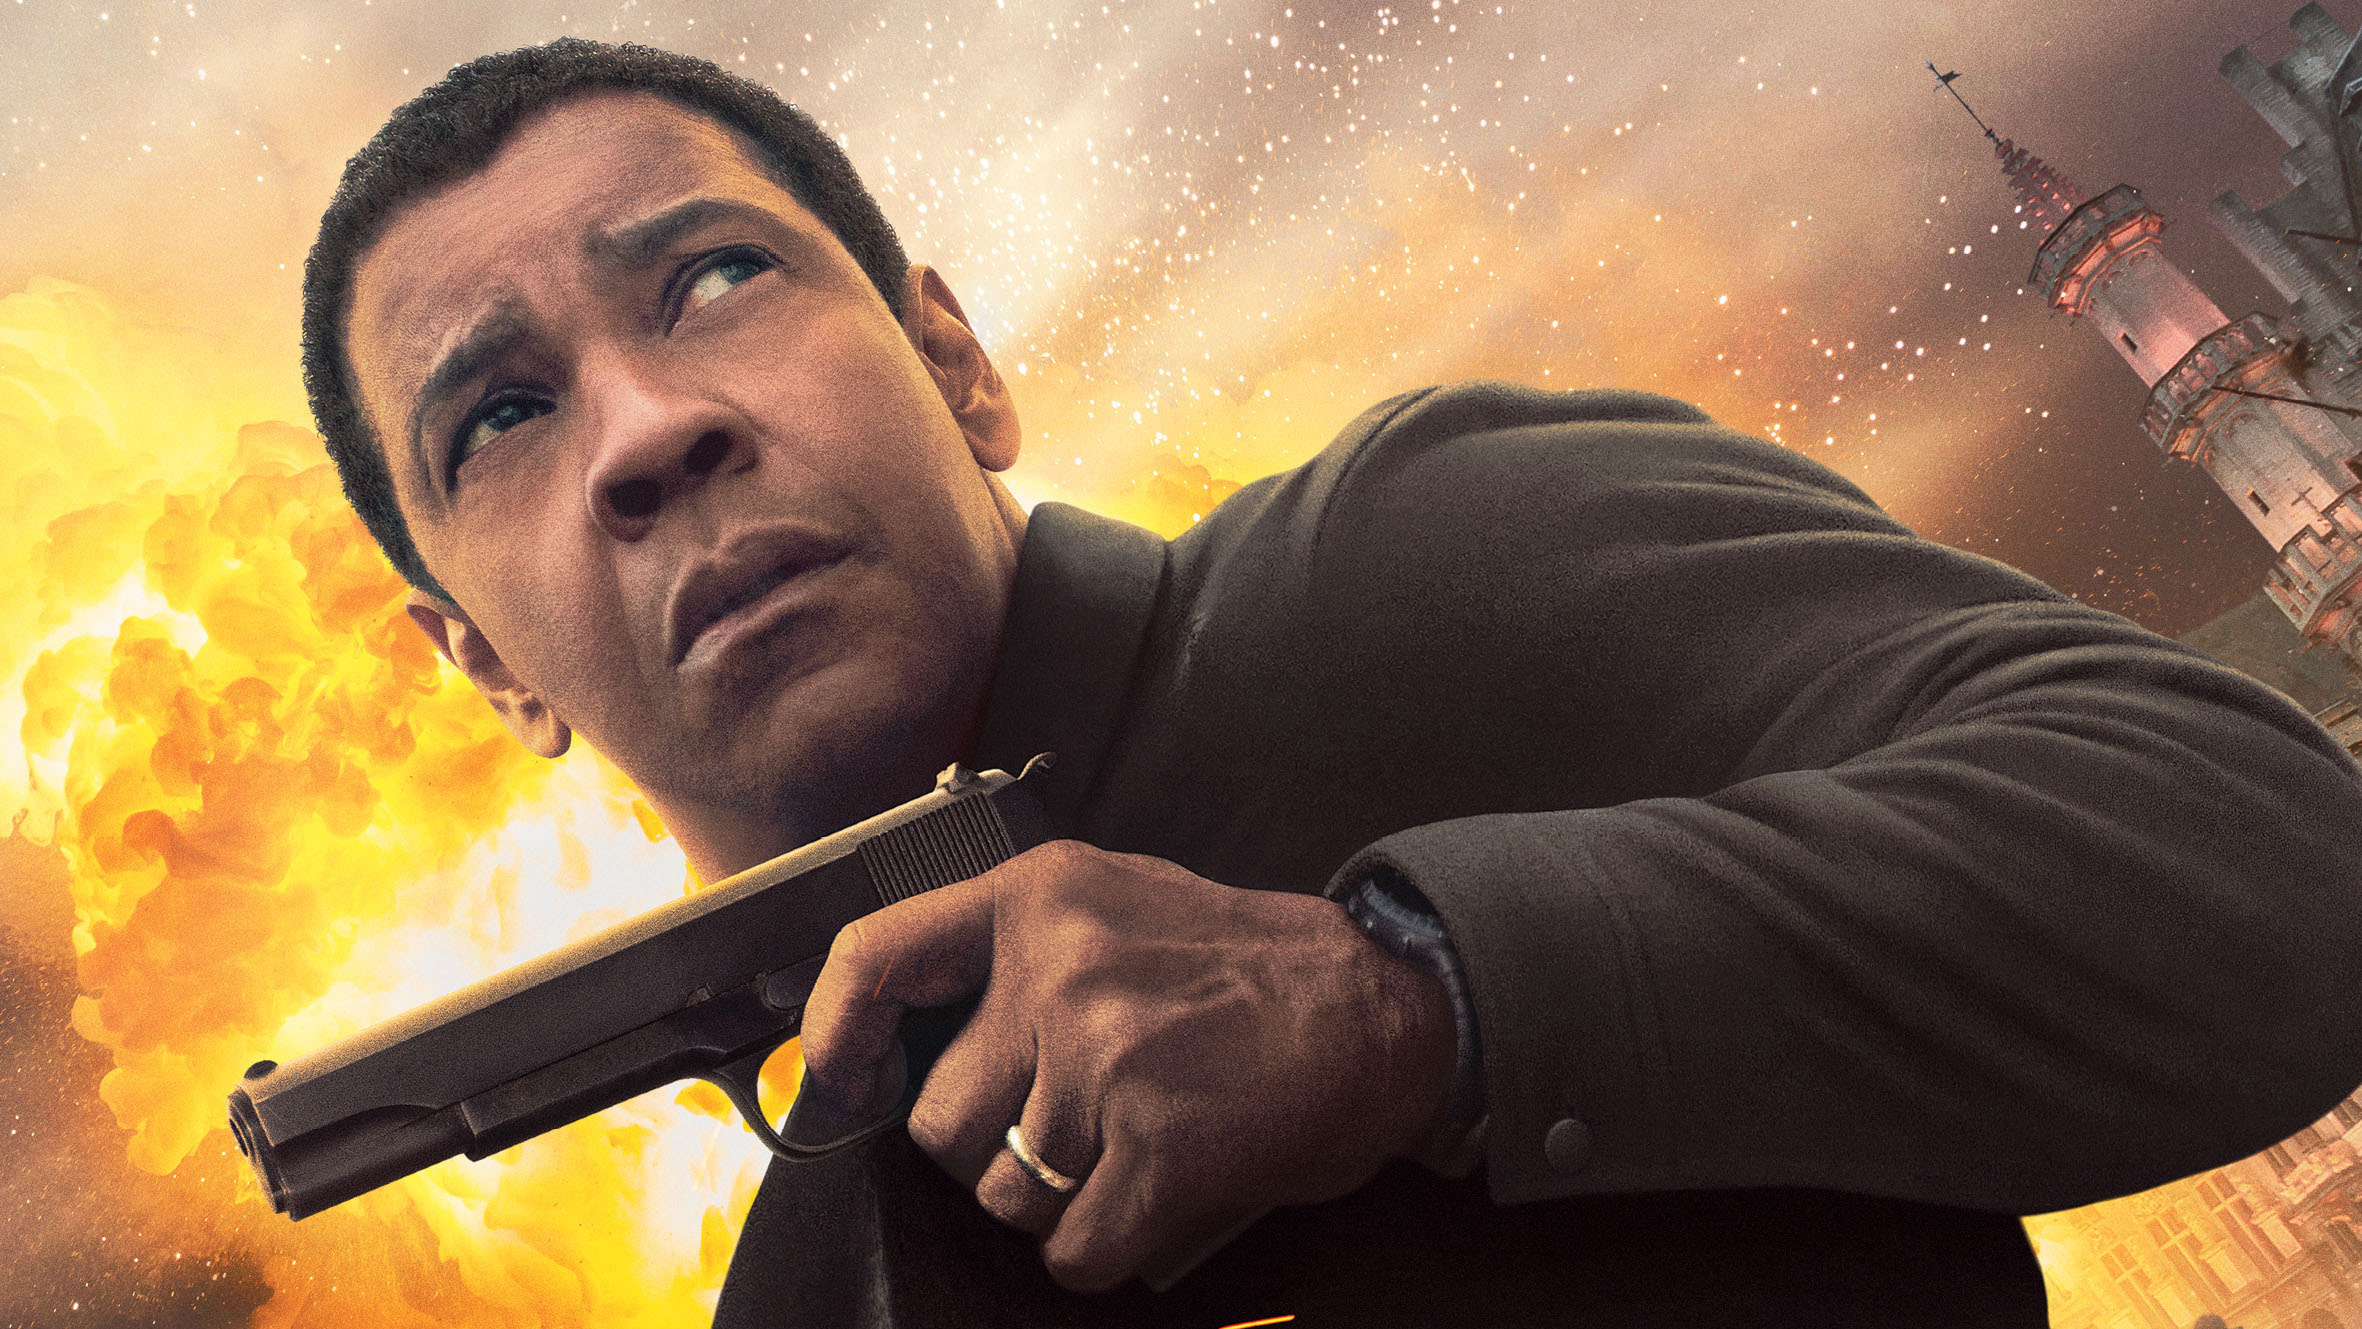 The Equalizer 2, Action film, 4K wallpapers, Movie photos, 2370x1330 HD Desktop